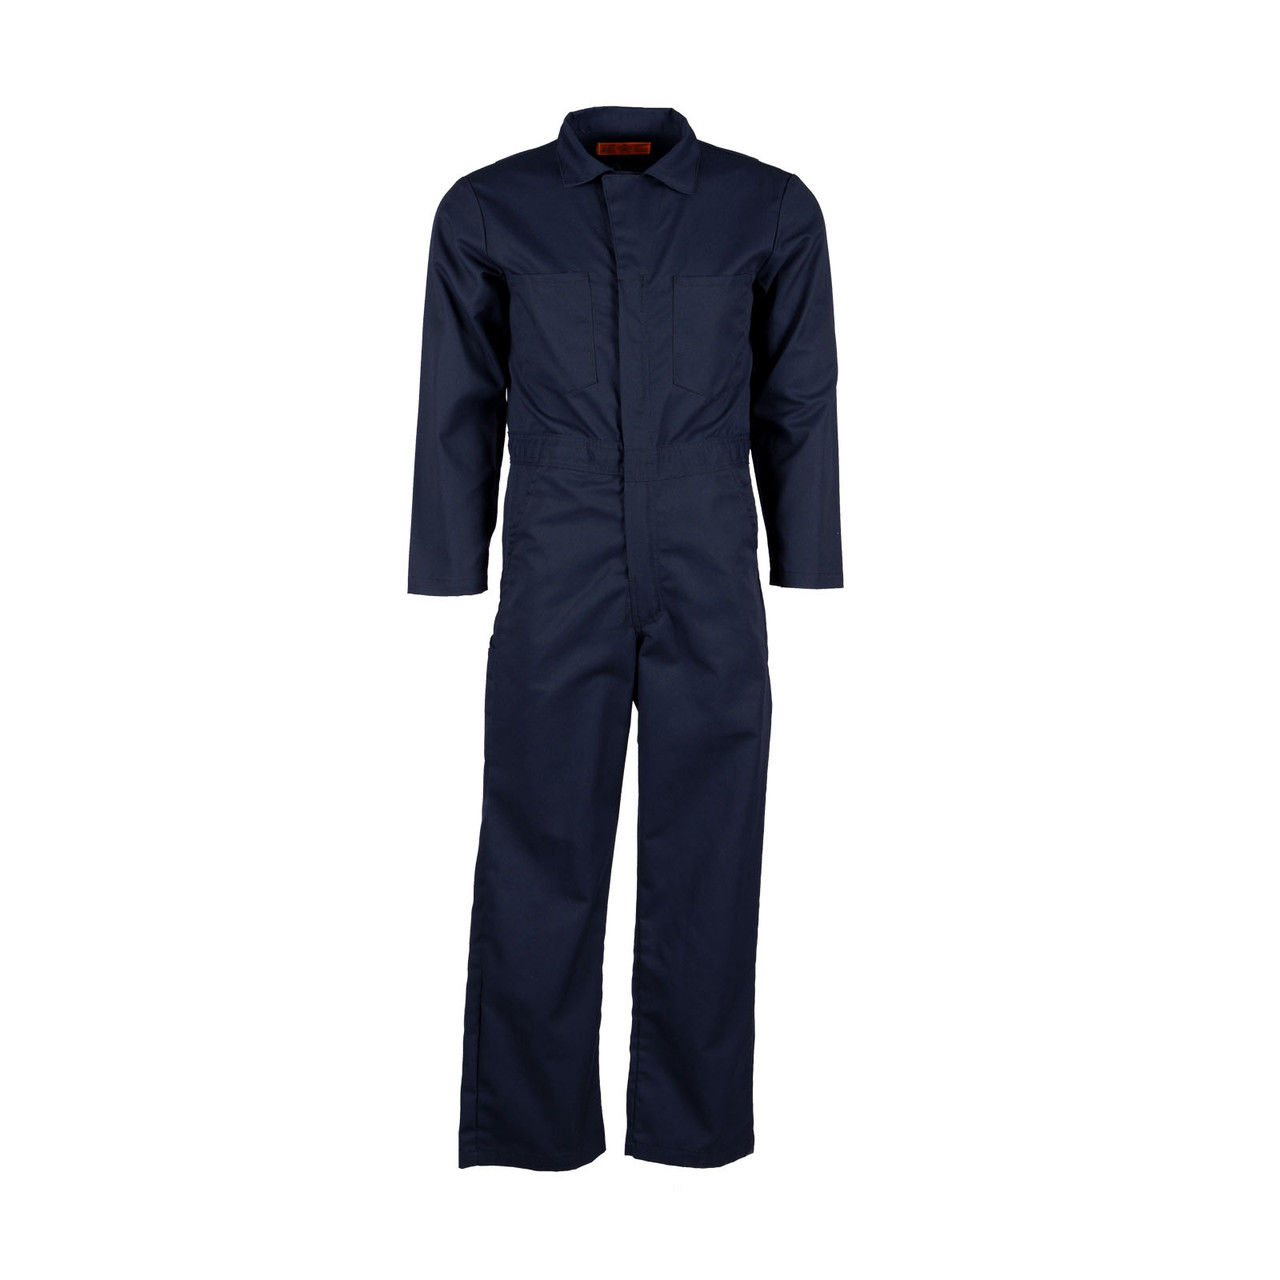 From which location are the CV10NV navy coveralls by Pinnacle Textile shipped?